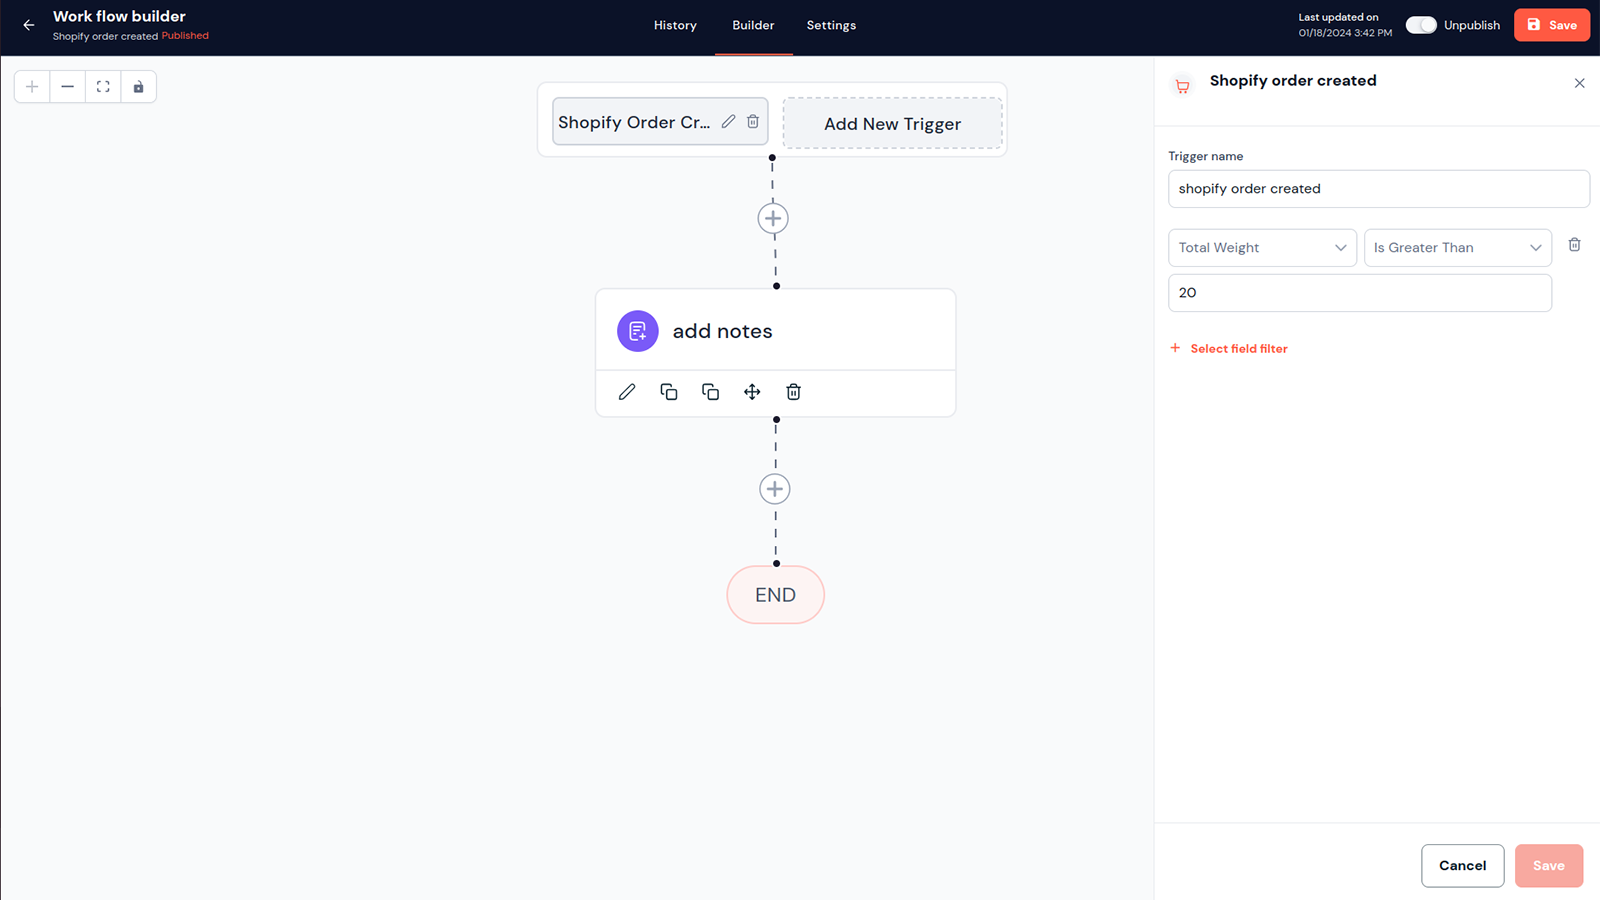 Workflow for create Order